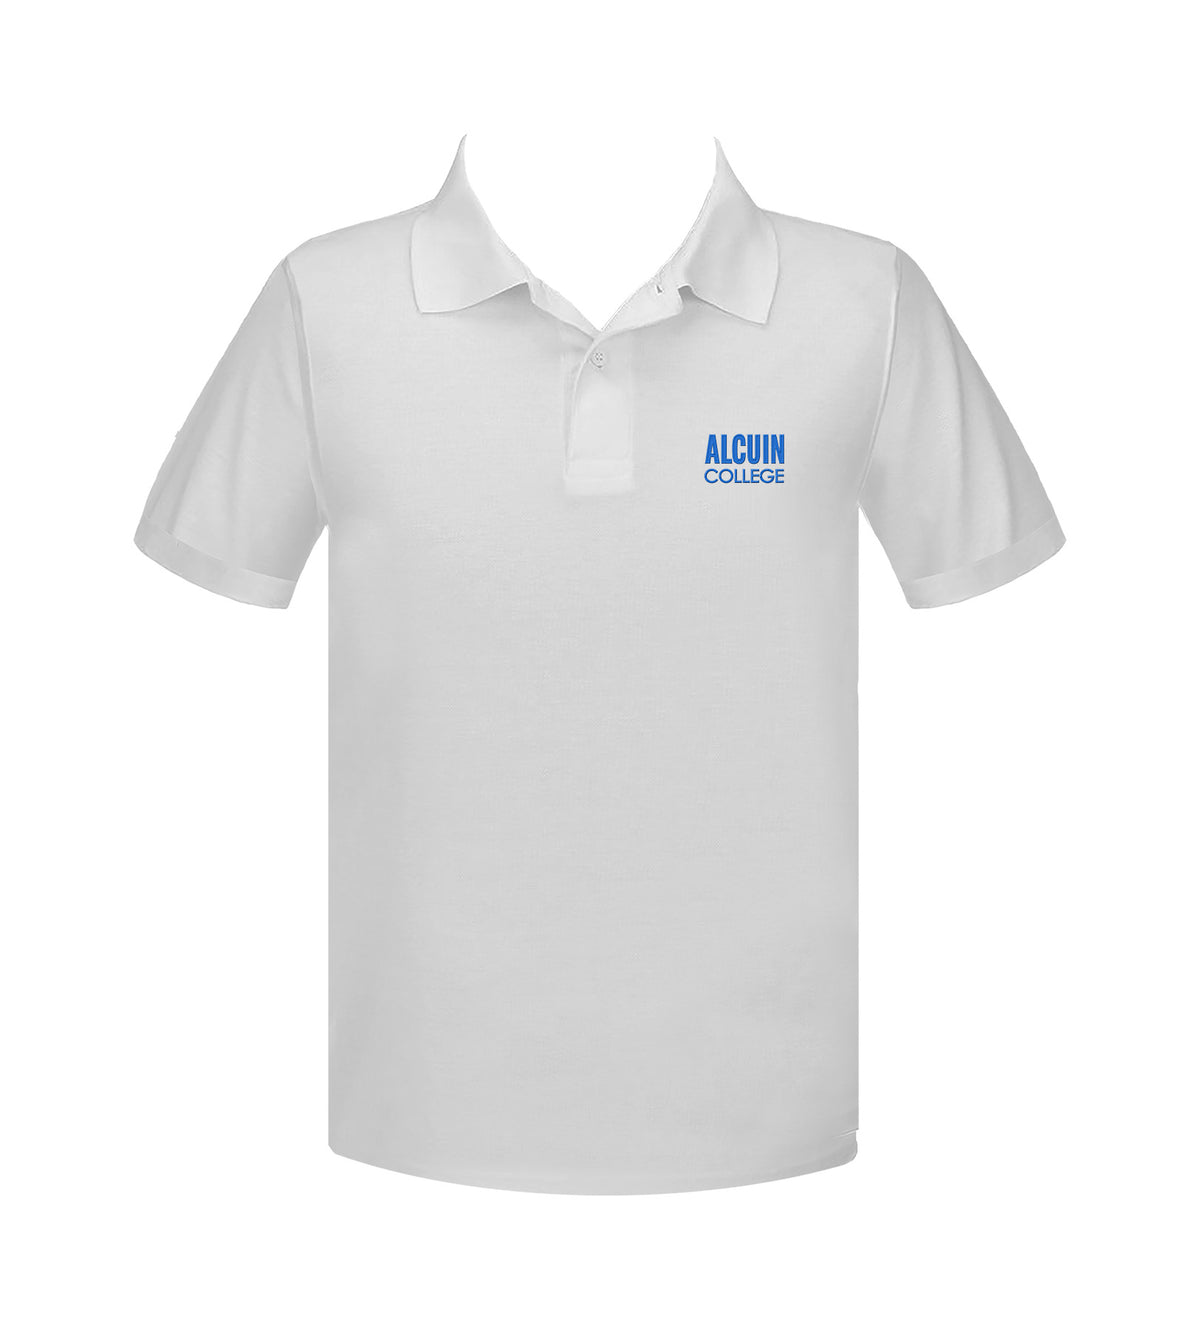 ALCUIN COLLEGE GRADE 9-12 GOLF SHIRT, UNISEX, YOUTH